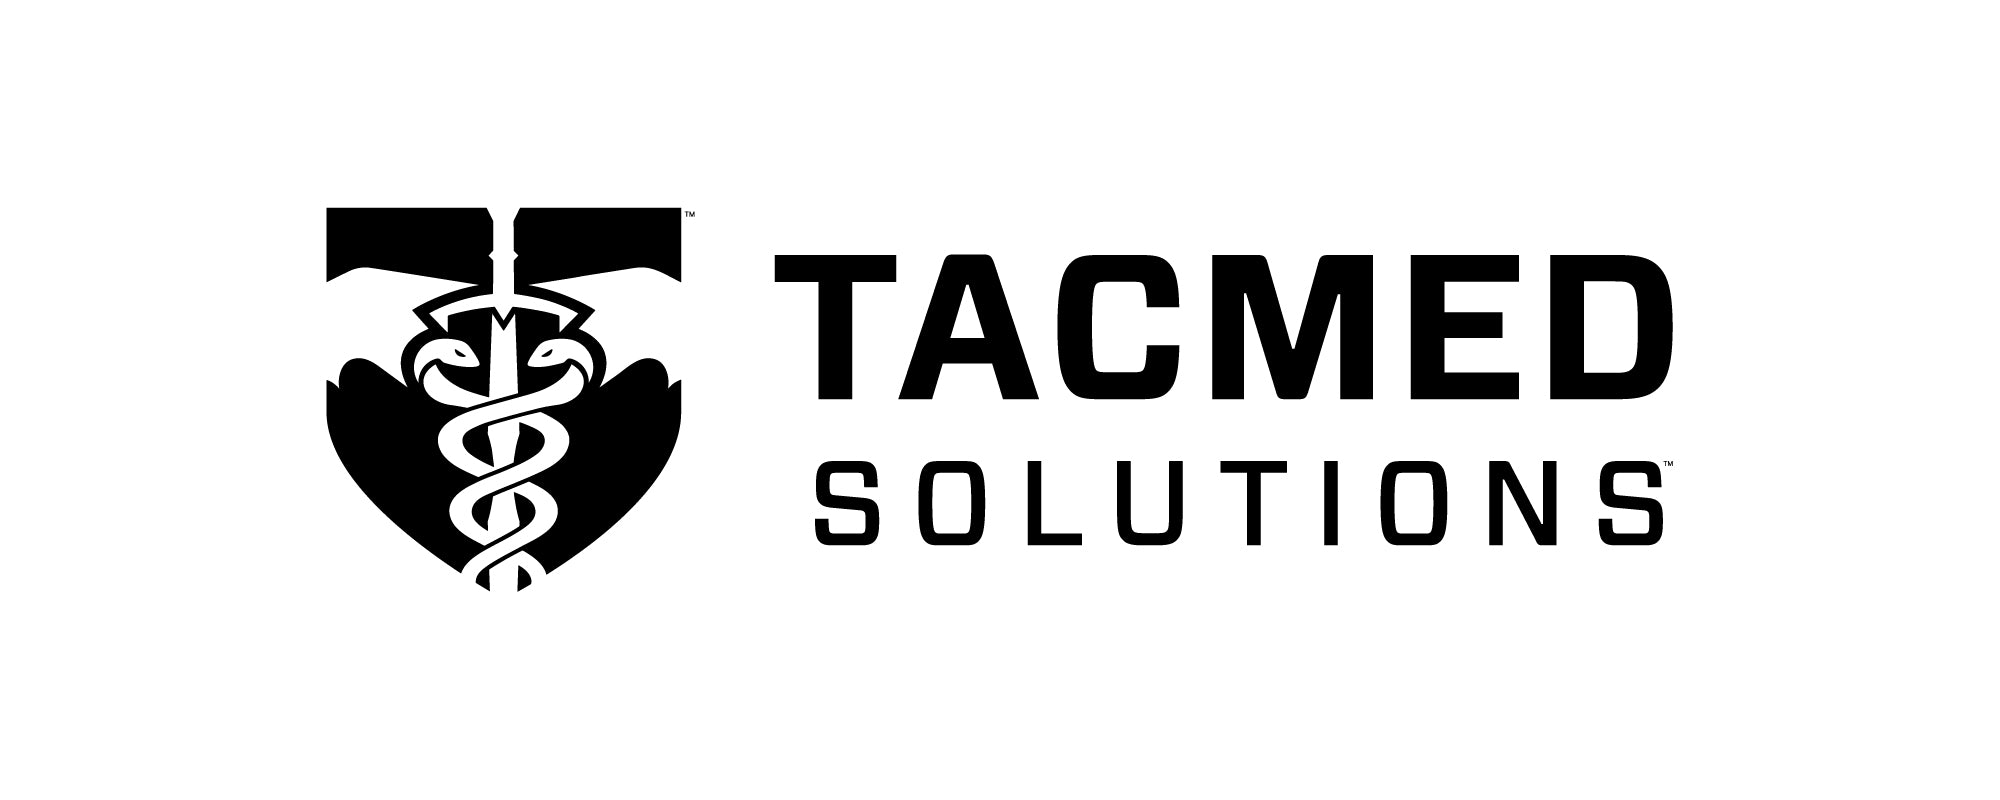 TacMed Solutions™ Welcomes New Director of Sales, Patrick Smith